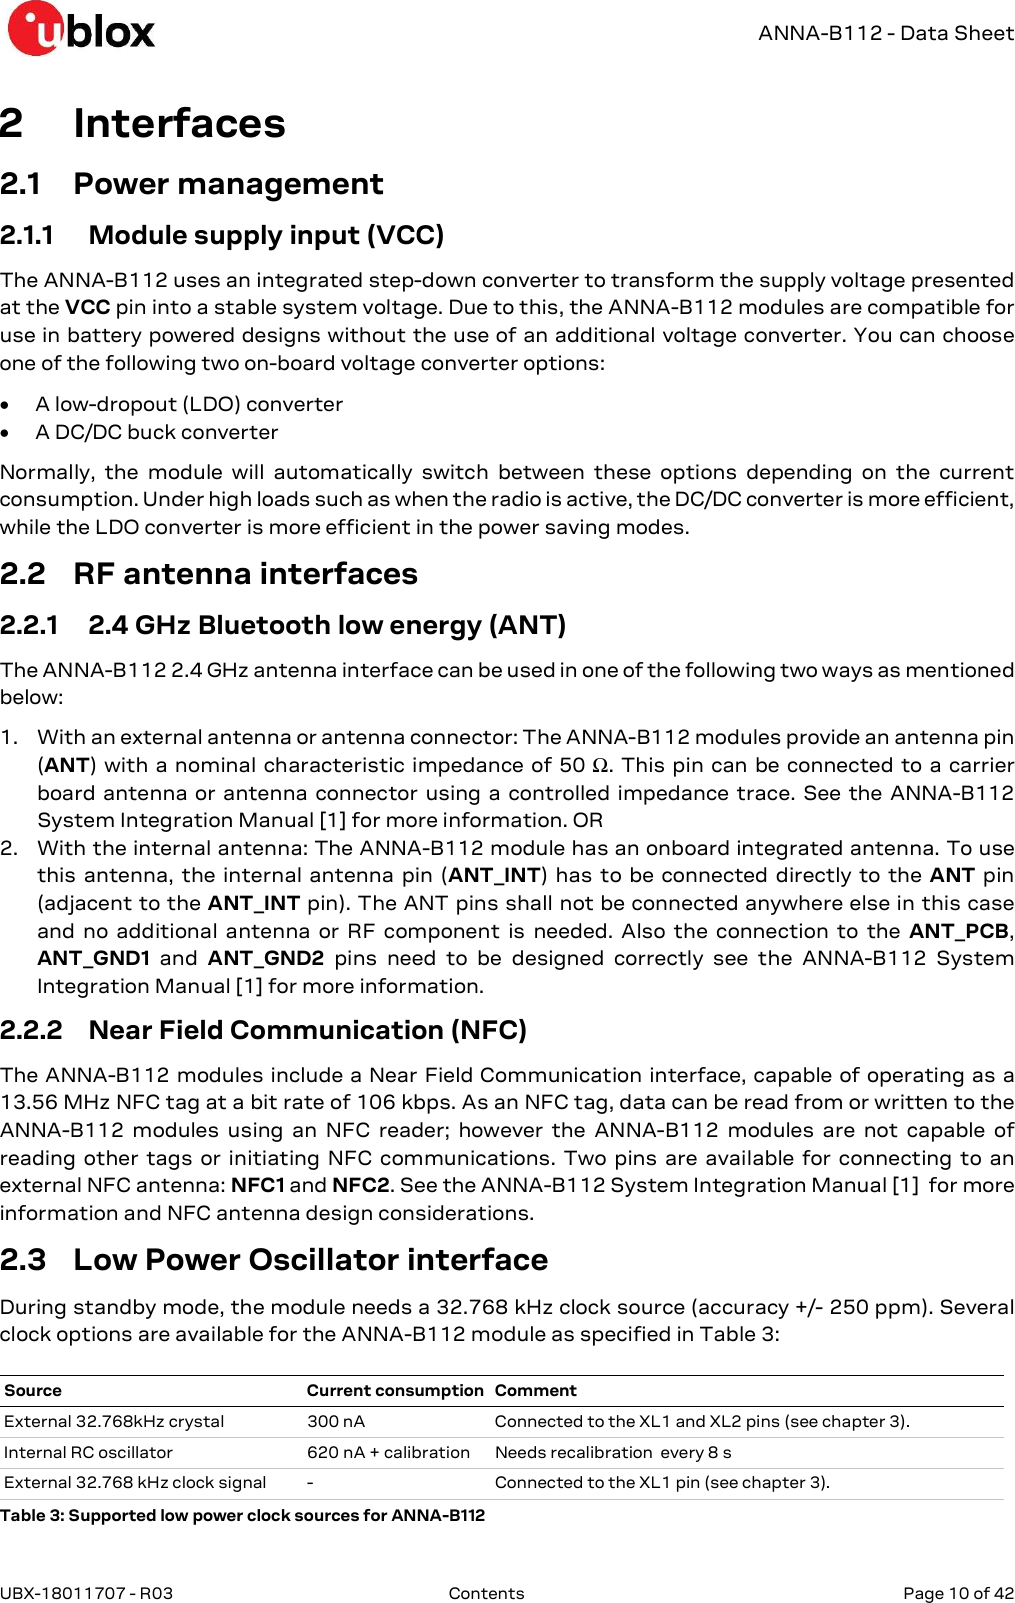   ANNA-B112 - Data Sheet UBX-18011707 - R03  Contents   Page 10 of 42      2 Interfaces 2.1 Power management 2.1.1 Module supply input (VCC) The ANNA-B112 uses an integrated step-down converter to transform the supply voltage presented at the VCC pin into a stable system voltage. Due to this, the ANNA-B112 modules are compatible for use in battery powered designs without the use of an additional voltage converter. You can choose one of the following two on-board voltage converter options:  A low-dropout (LDO) converter  A DC/DC buck converter Normally,  the  module  will  automatically  switch  between  these  options  depending  on  the  current consumption. Under high loads such as when the radio is active, the DC/DC converter is more efficient, while the LDO converter is more efficient in the power saving modes. 2.2 RF antenna interfaces 2.2.1 2.4 GHz Bluetooth low energy (ANT) The ANNA-B112 2.4 GHz antenna interface can be used in one of the following two ways as mentioned below: 1. With an external antenna or antenna connector: The ANNA-B112 modules provide an antenna pin (ANT) with a nominal characteristic impedance of 50 Ω. This pin  can be connected to a carrier board antenna or antenna  connector using a  controlled impedance  trace. See the ANNA-B112 System Integration Manual [1] for more information. OR 2. With the internal antenna: The ANNA-B112 module has an onboard integrated antenna. To use this antenna,  the  internal  antenna  pin (ANT_INT)  has  to be connected  directly to the  ANT pin (adjacent to the ANT_INT pin). The ANT pins shall not be connected anywhere else in this case and  no  additional  antenna  or  RF  component  is  needed.  Also  the  connection  to  the  ANT_PCB, ANT_GND1  and  ANT_GND2  pins  need  to  be  designed  correctly  see  the  ANNA-B112  System Integration Manual [1] for more information. 2.2.2 Near Field Communication (NFC) The ANNA-B112 modules include a Near Field Communication interface, capable of operating as a 13.56 MHz NFC tag at a bit rate of 106 kbps. As an NFC tag, data can be read from or written to the ANNA-B112  modules  using  an  NFC  reader;  however  the  ANNA-B112  modules  are  not  capable  of reading  other  tags or  initiating  NFC  communications.  Two  pins  are  available for  connecting  to  an external NFC antenna: NFC1 and NFC2. See the ANNA-B112 System Integration Manual [1]  for more information and NFC antenna design considerations. 2.3 Low Power Oscillator interface During standby mode, the module needs a 32.768 kHz clock source (accuracy +/- 250 ppm). Several clock options are available for the ANNA-B112 module as specified in Table 3: Table 3: Supported low power clock sources for ANNA-B112 Source Current consumption Comment External 32.768kHz crystal  300 nA  Connected to the XL1 and XL2 pins (see chapter 3). Internal RC oscillator  620 nA + calibration  Needs recalibration  every 8 s External 32.768 kHz clock signal  -  Connected to the XL1 pin (see chapter 3). 